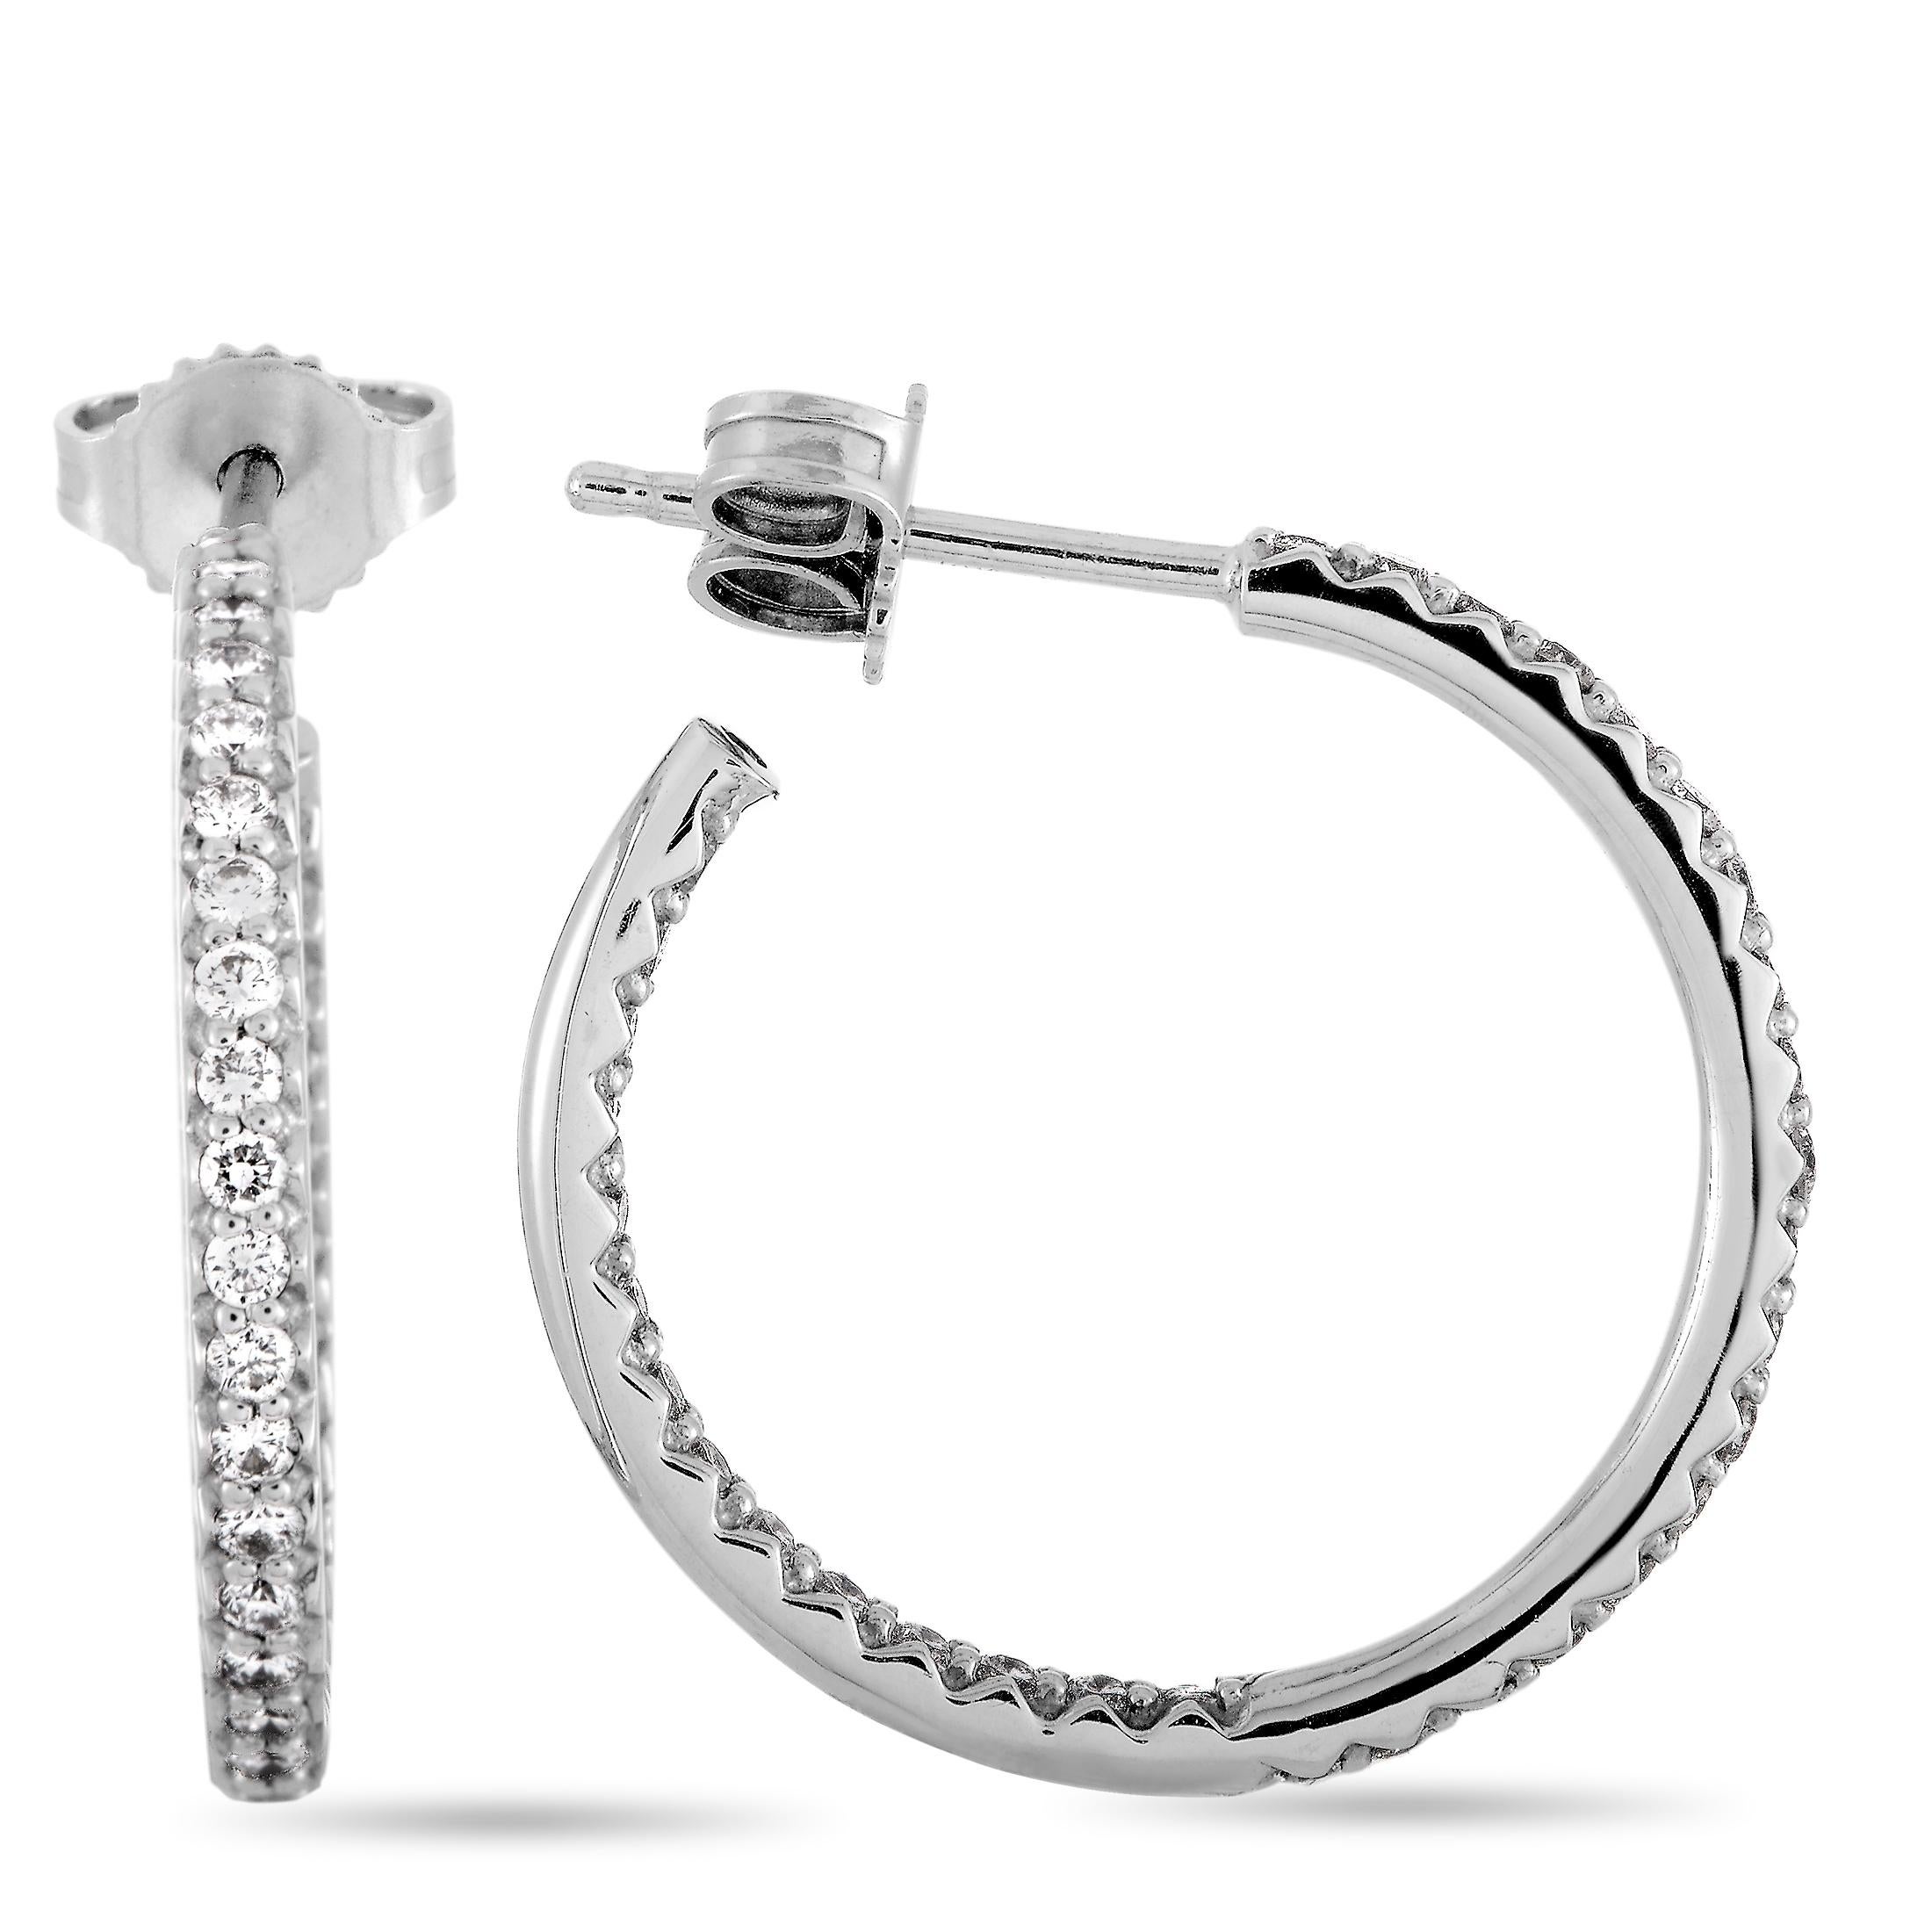 This Roberto Coin pair of earrings is made out of 18K white gold and diamonds that amount to 0.87 carats. The earrings measure 0.88” by 0.15” and each of the two weighs 2 grams.
 
 Offered in brand new condition, the earrings include the